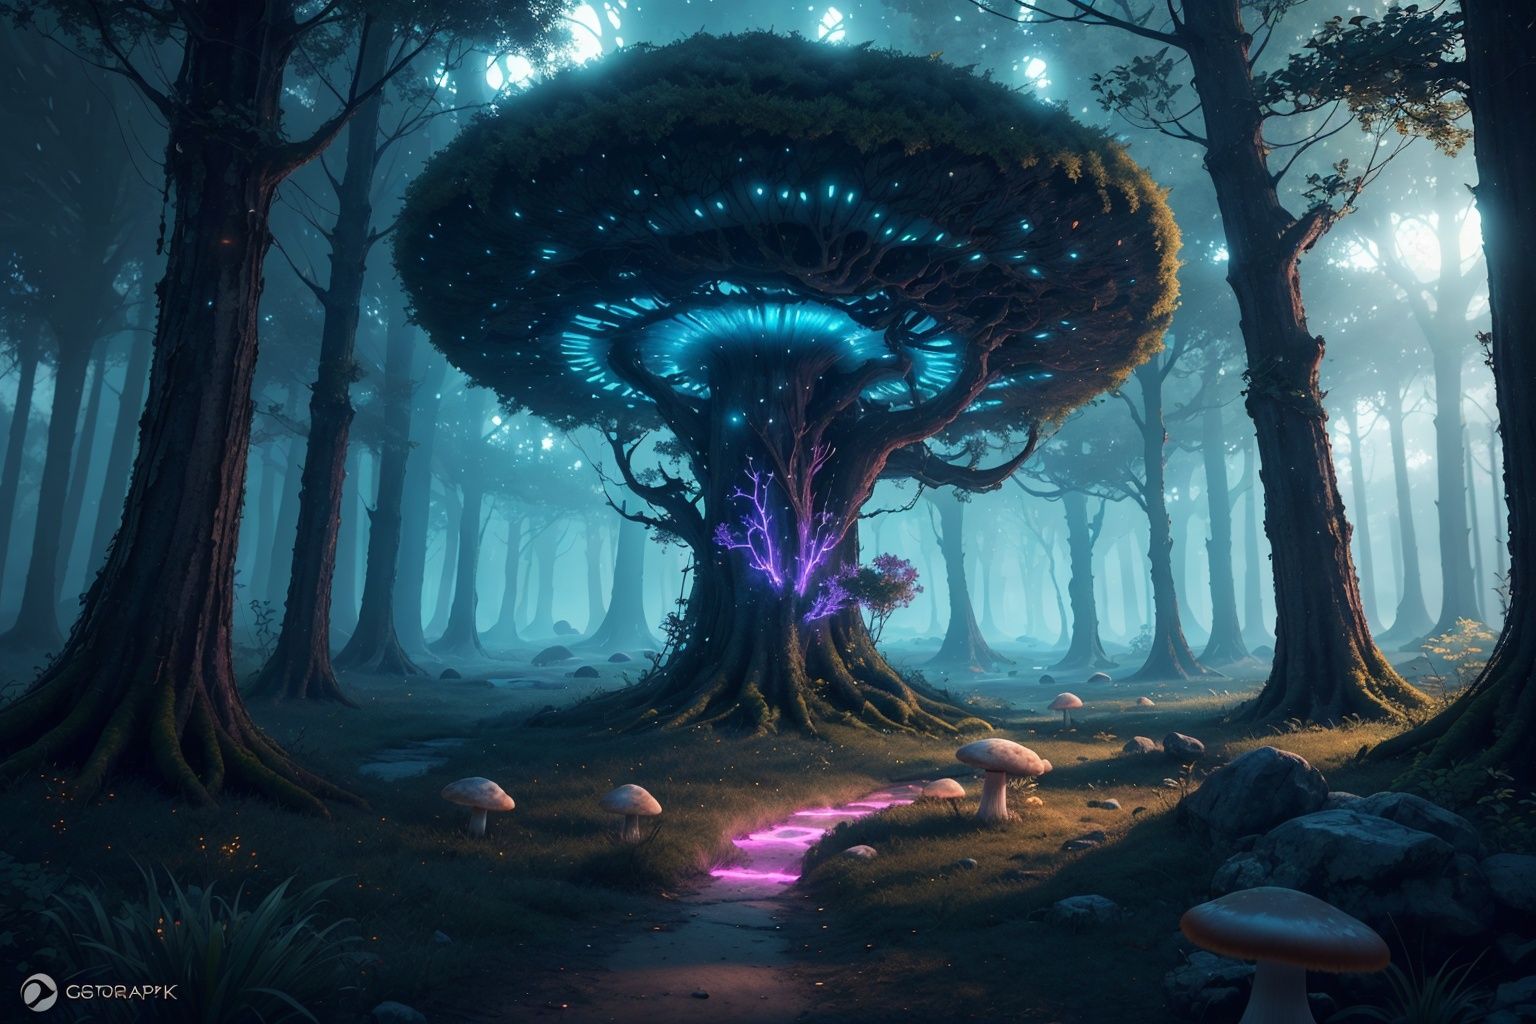  An otherworldly forest where bioluminescent mushrooms light the way, leading to hidden portals that transport adventurers to enchanted realms. Rendered in a mix of photography, CGI render, and digital artwork.